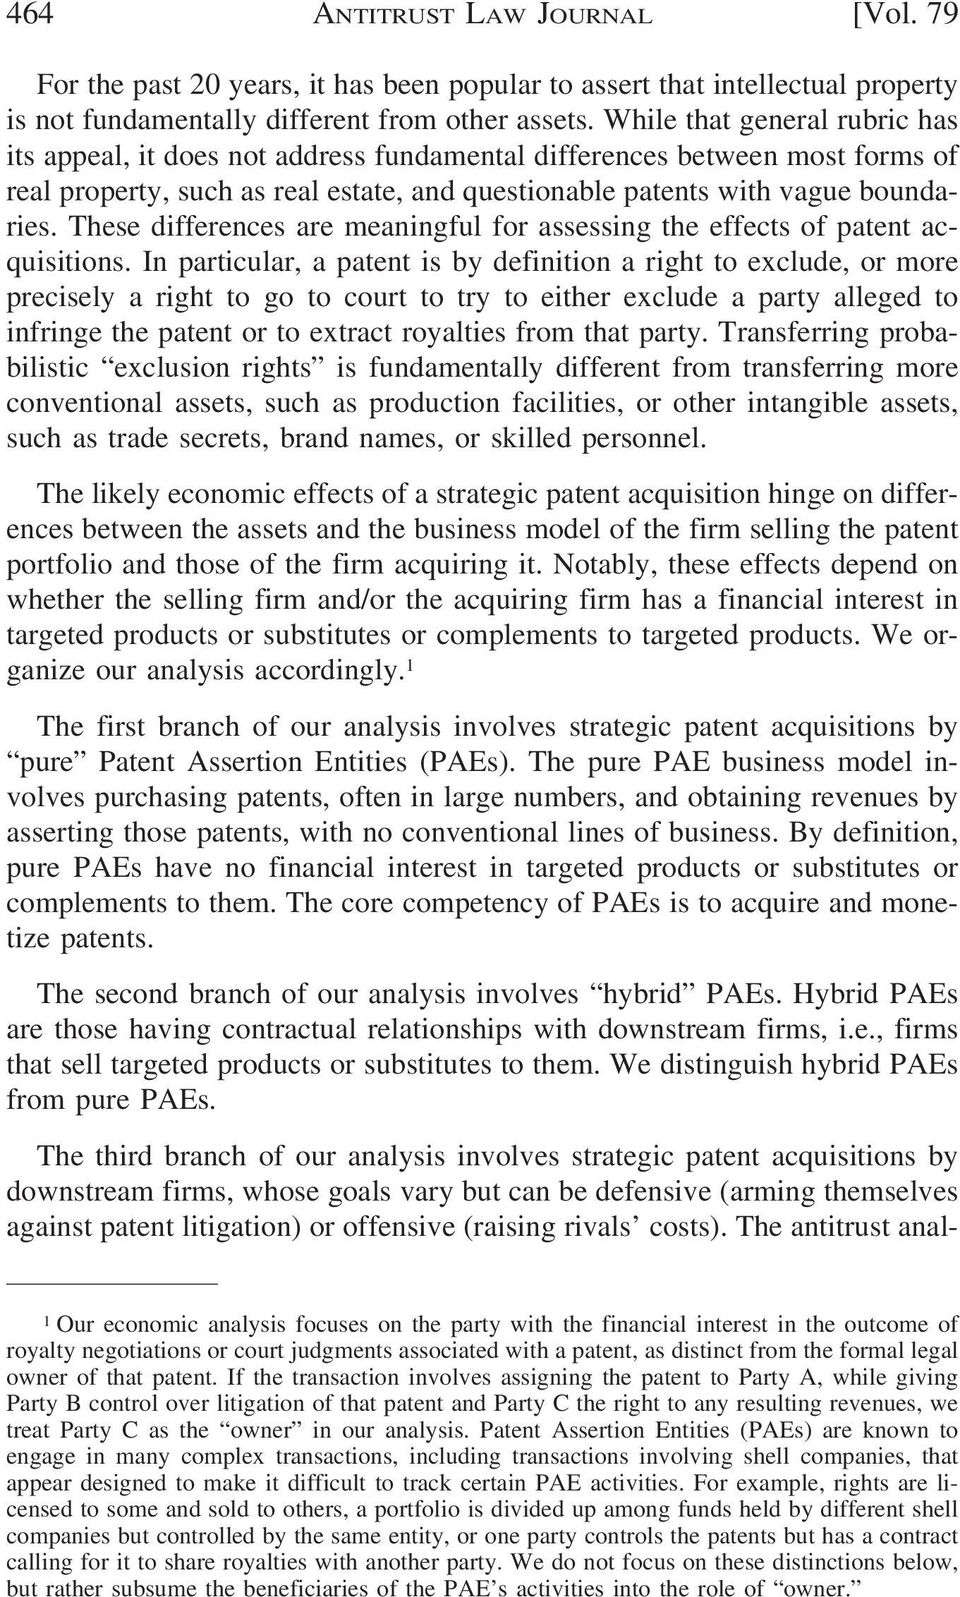 These differences are meaningful for assessing the effects of patent acquisitions.